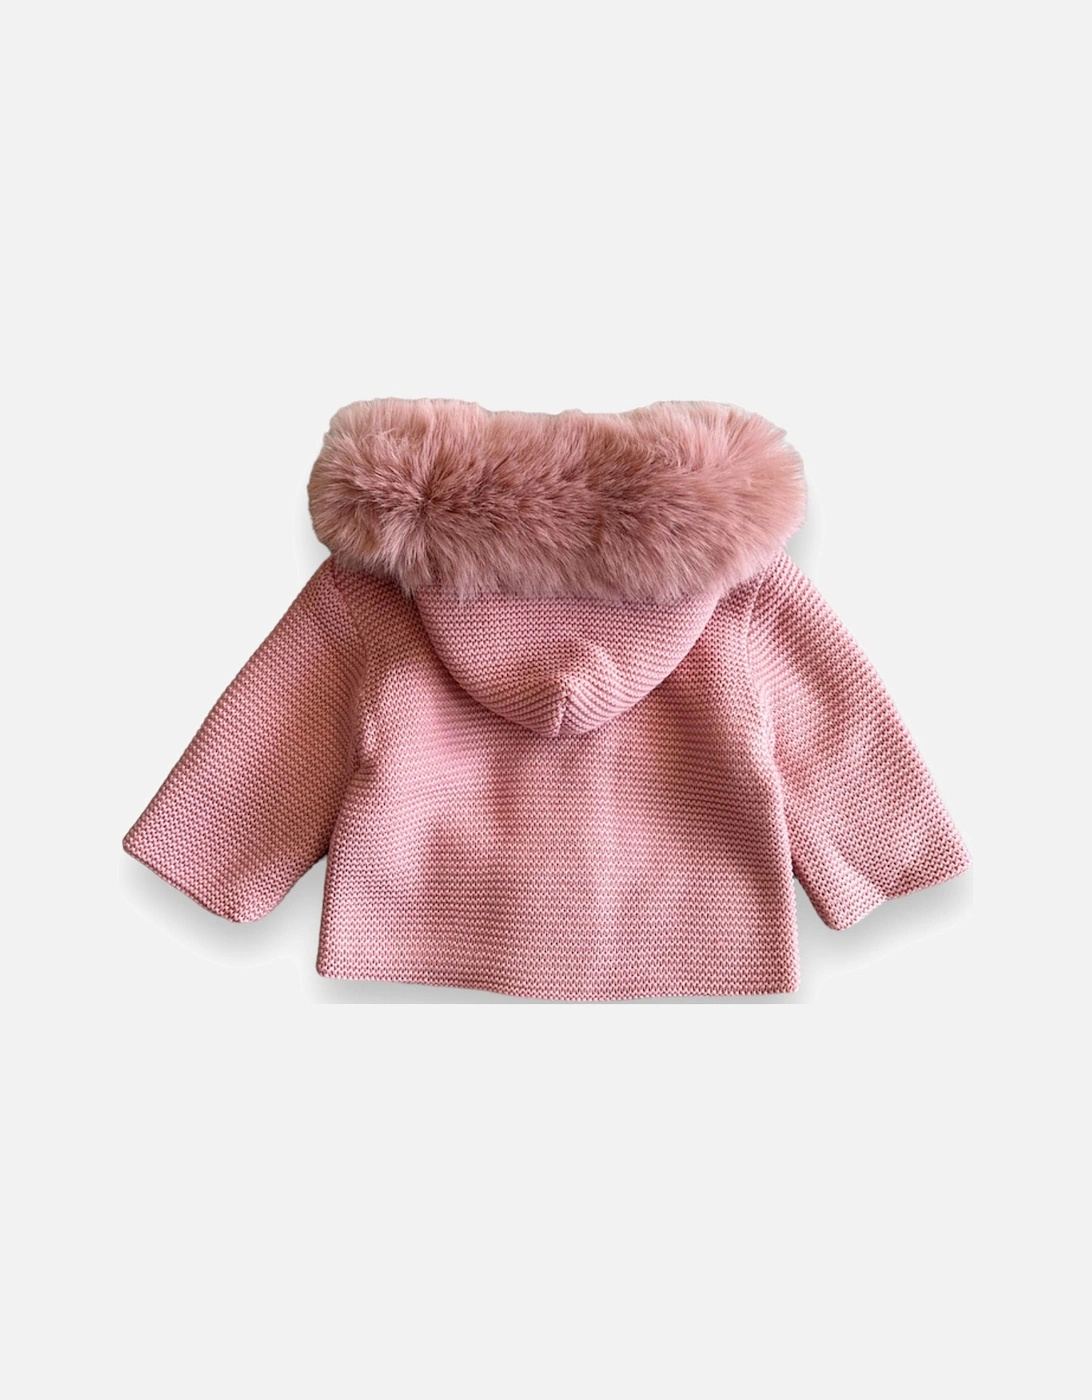 Dusty Pink Knitted Synthetic Fur Cardigan